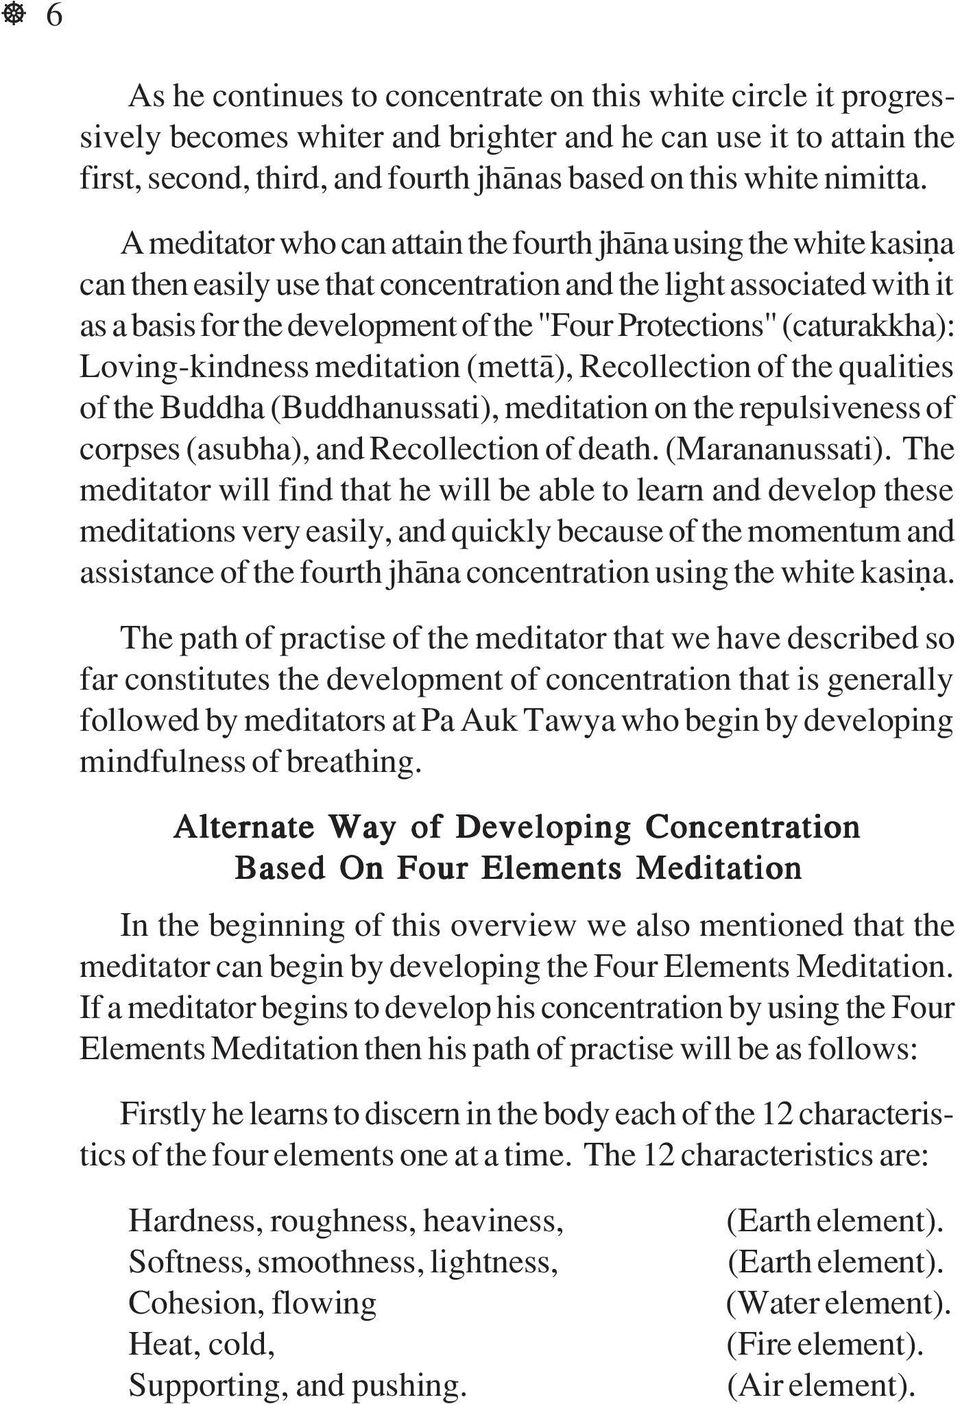 A meditator who can attain the fourth jhœna using the white kasiöa can then easily use that concentration and the light associated with it as a basis for the development of the "Four Protections"